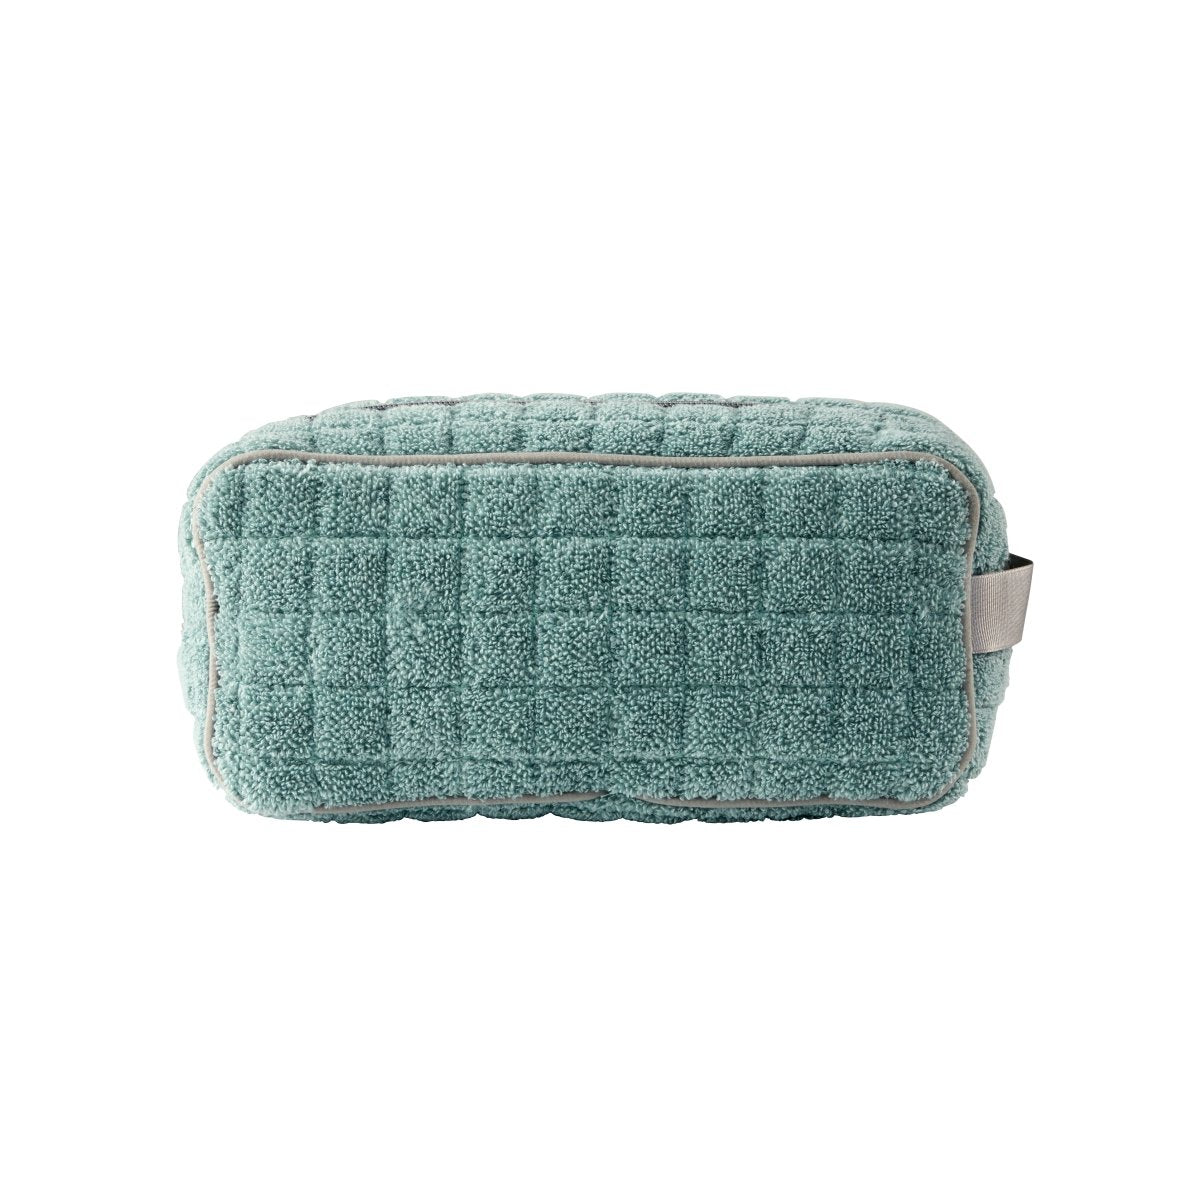 Etoile Fjord Toiletry Bag by Yves Delorme at Fig Linens and Home